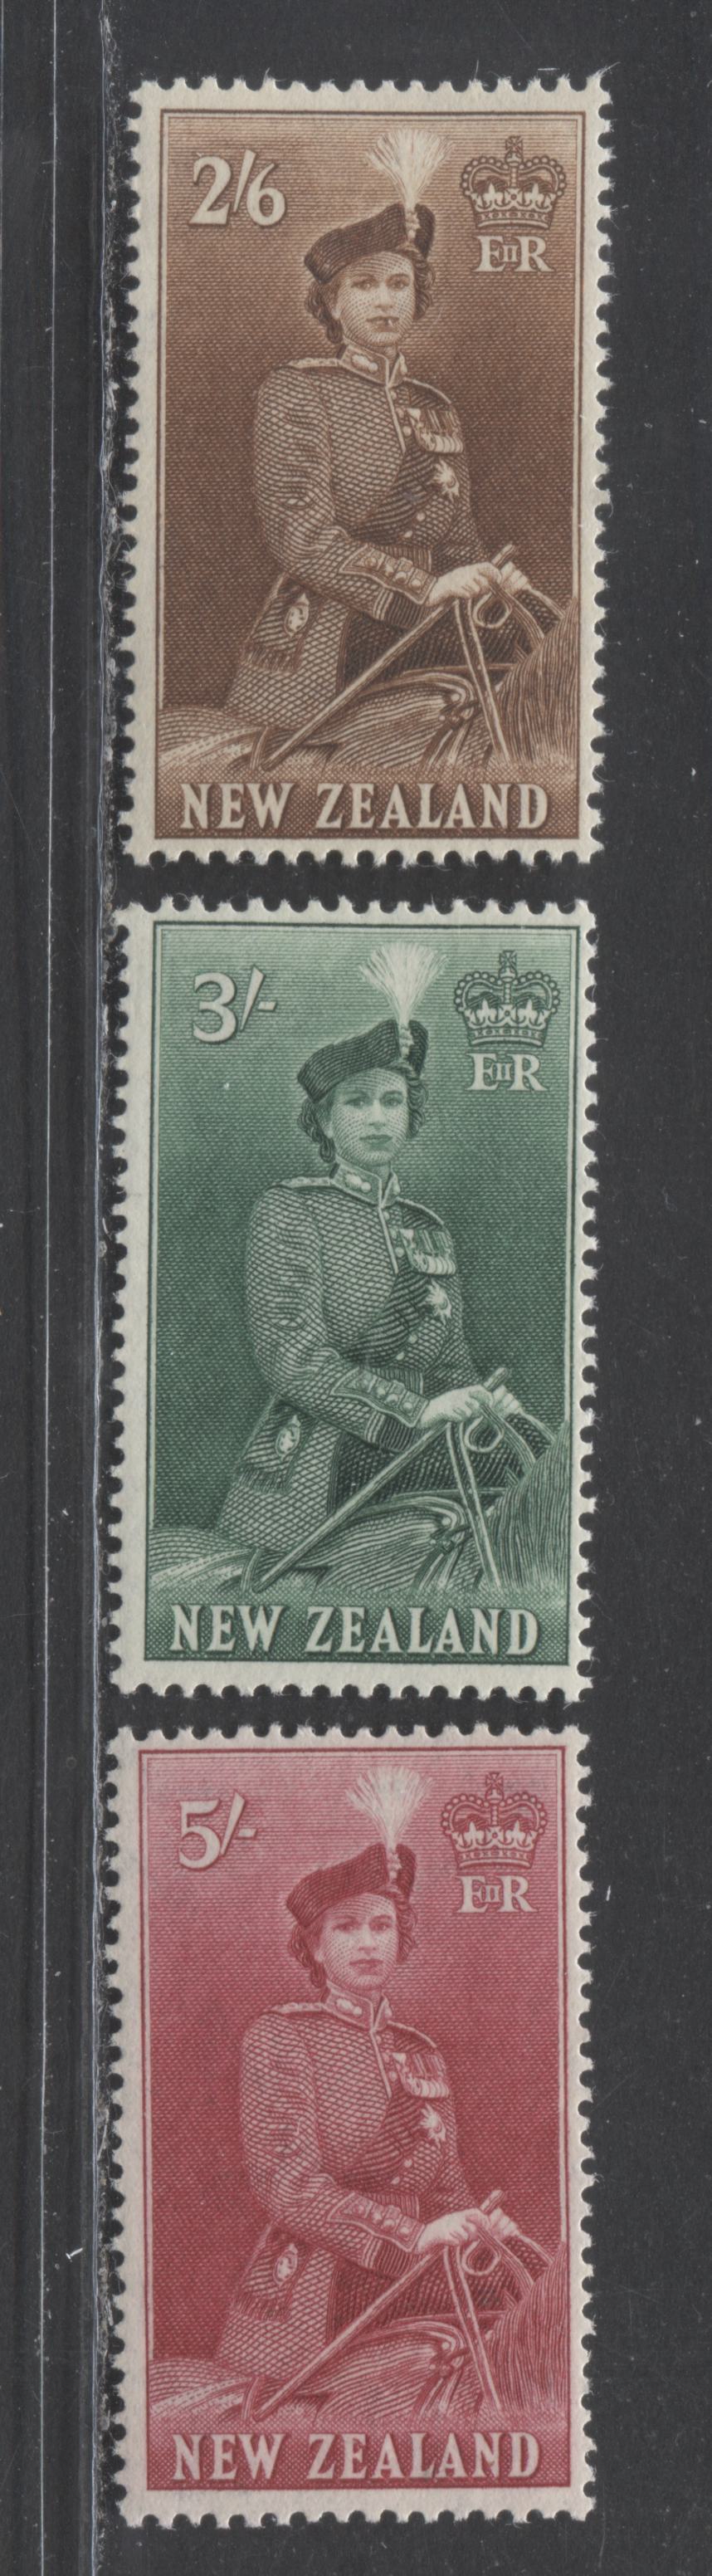 Lot 121 New Zealand SC#298B-300 1953-1957 Queen Elizabeth II Definitives, A FOG Range Of Singles, 2017 Scott Cat. $55.5 USD, Click on Listing to See ALL Pictures